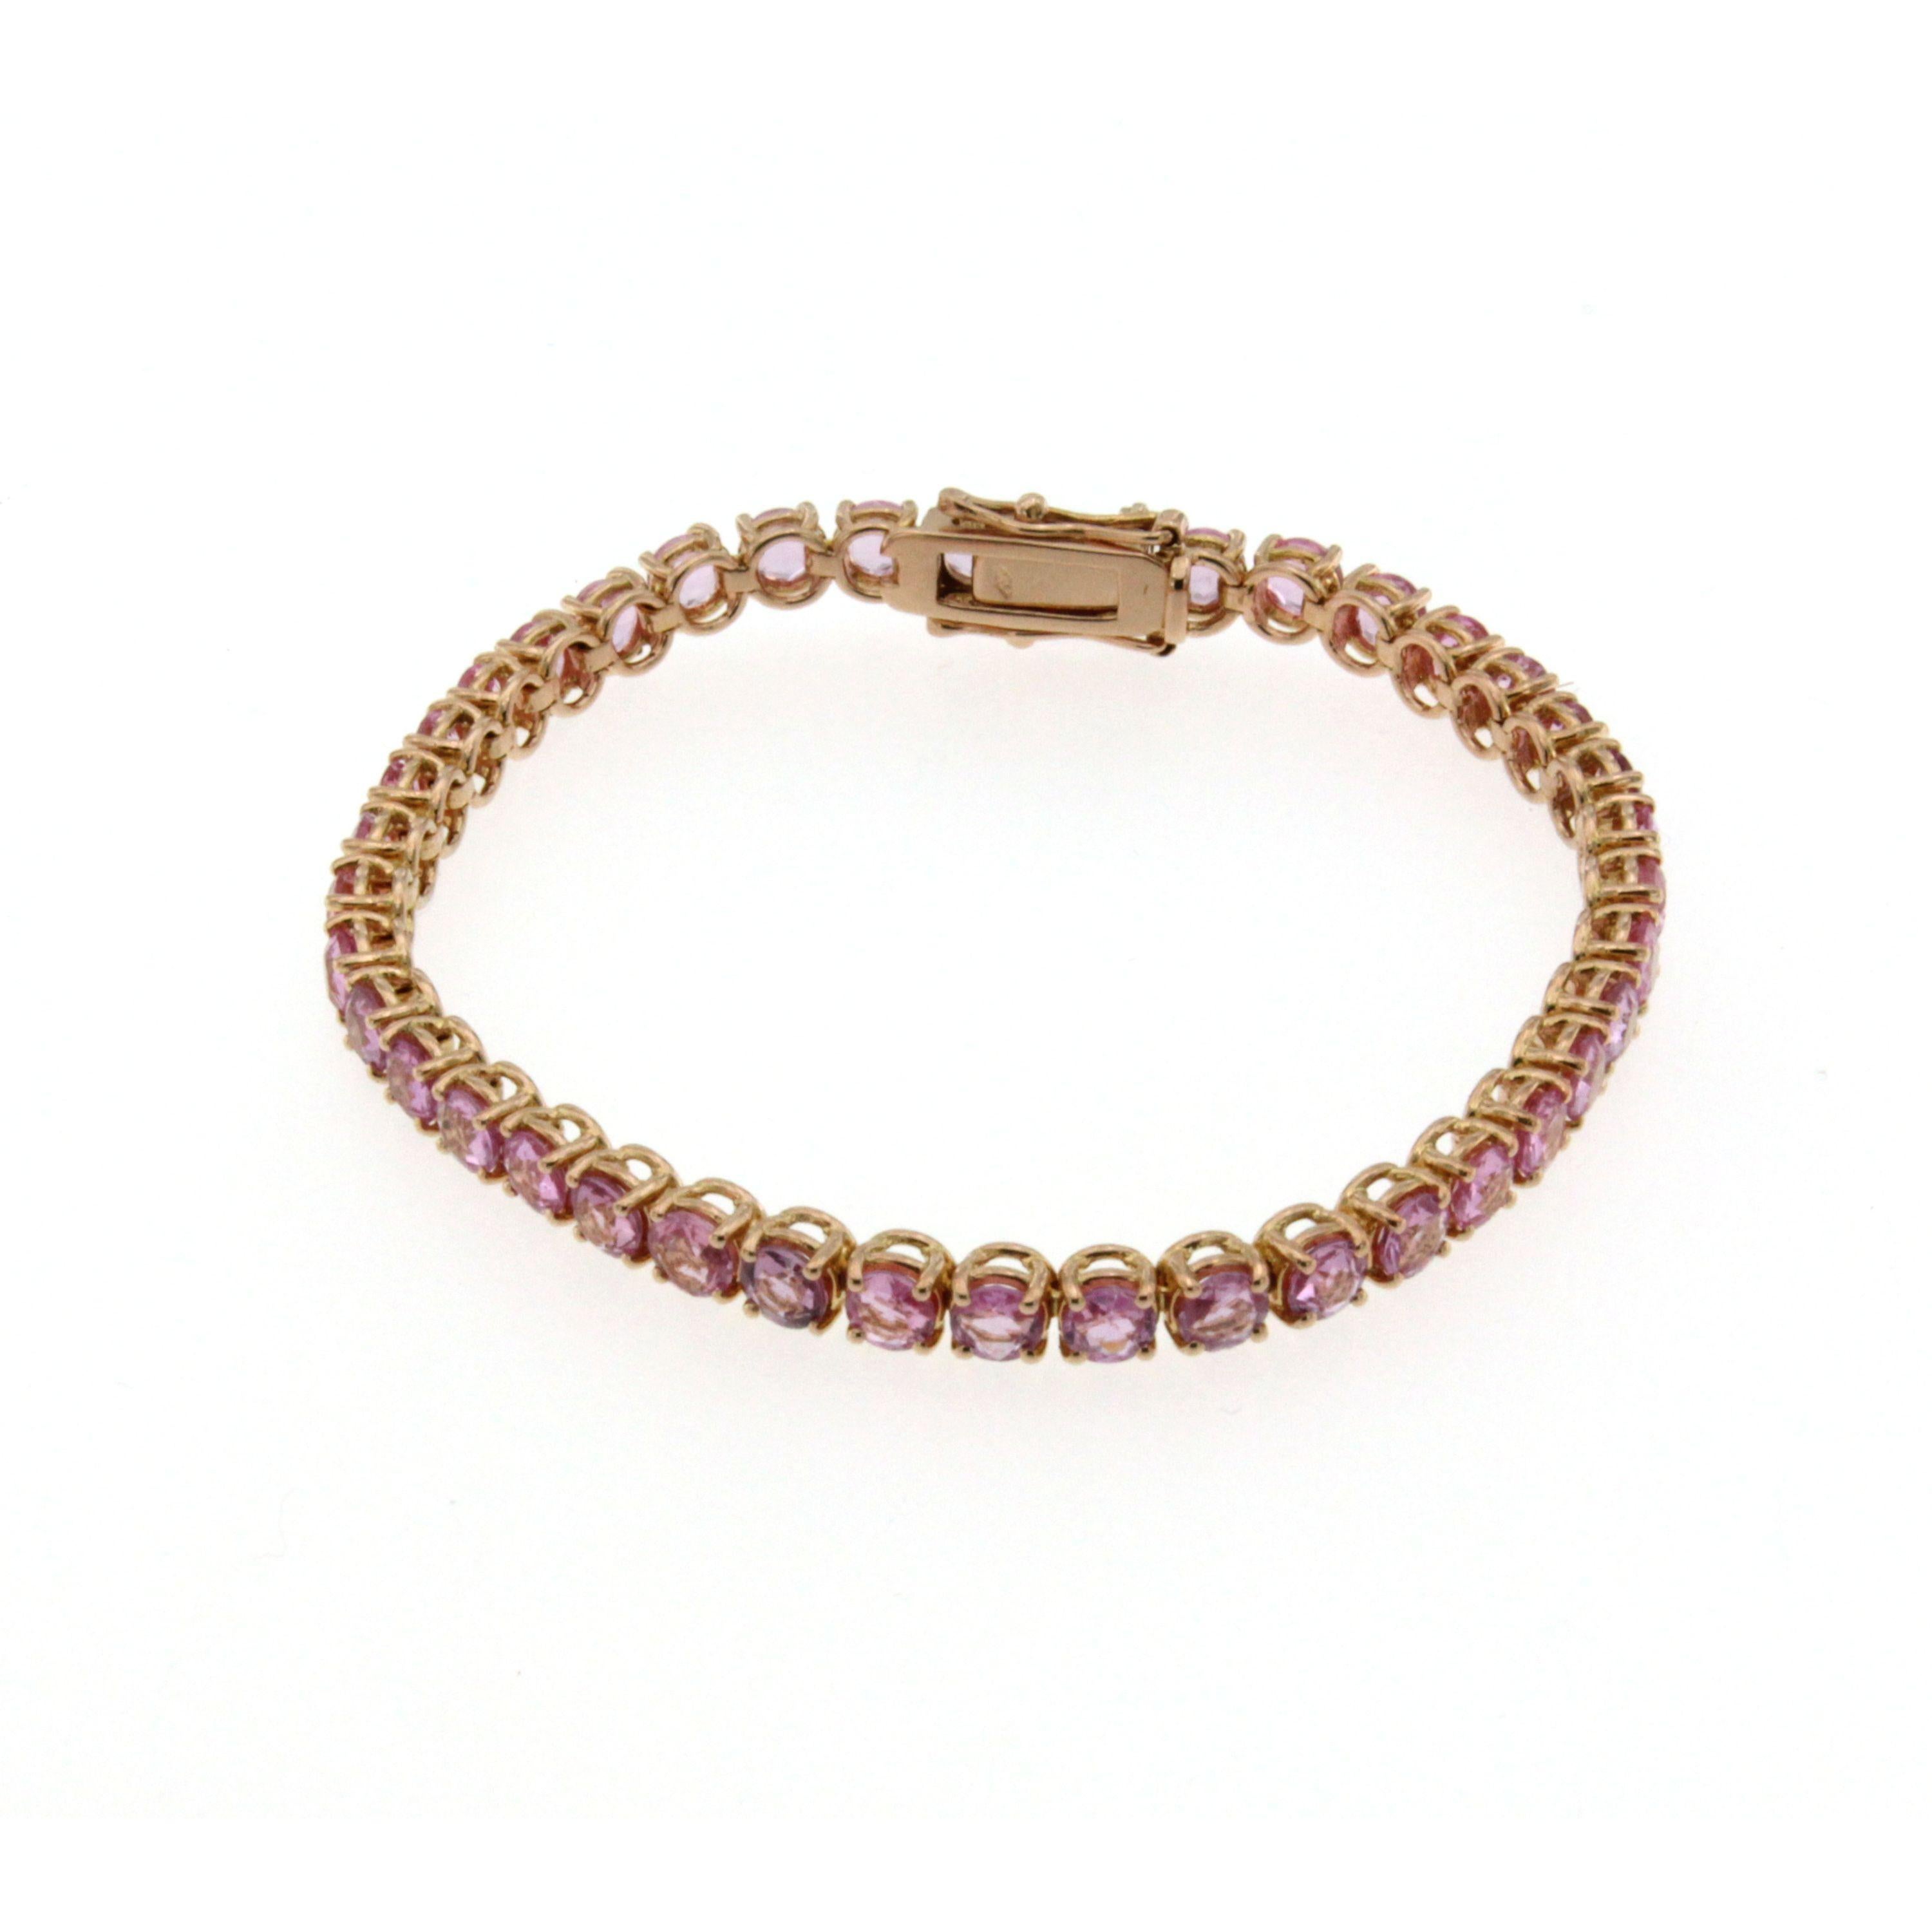 Fabulous important brand new bracelet made in solid 18k rose gold and set with 8.50 Carats of vivid Natural Unheated Pink Sapphires, weighing 0.20 carat each (3,5 mm).
This piece is designed and crafted in our laboratories, thanks to old techniques